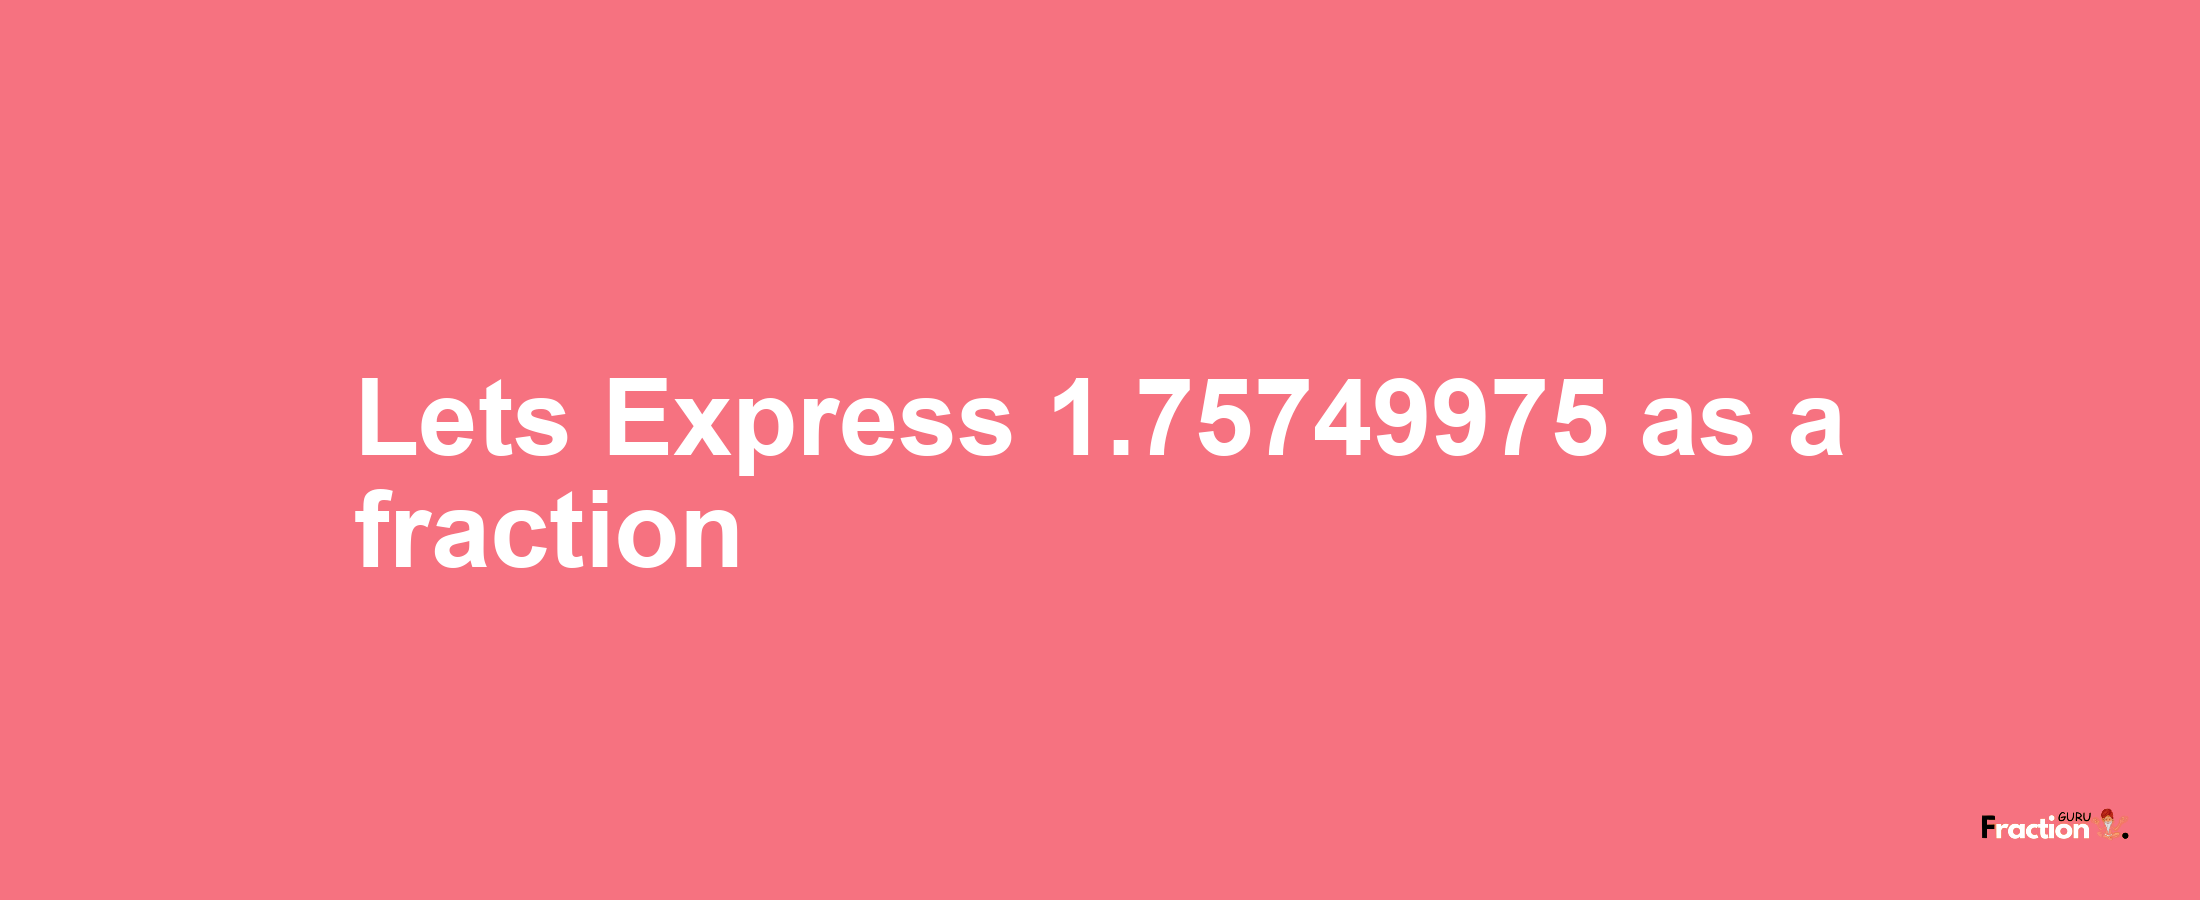 Lets Express 1.75749975 as afraction